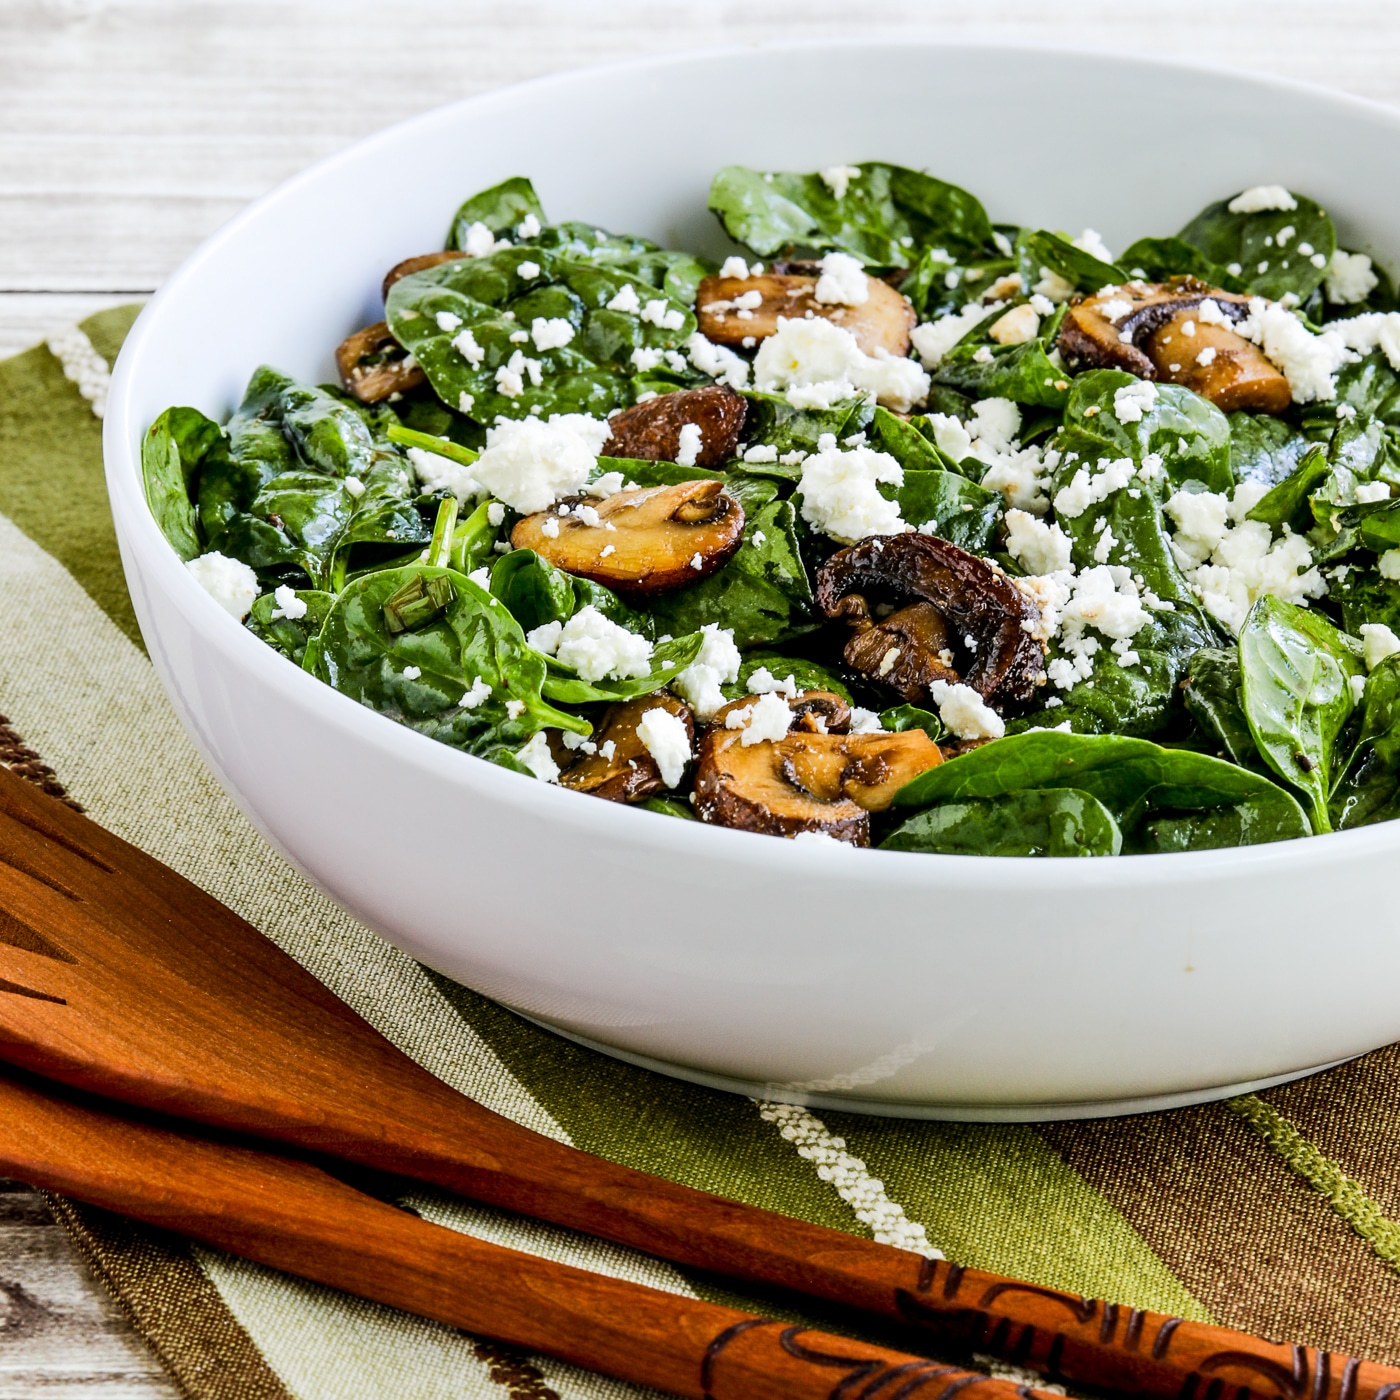 Balsamic Spinach Salad with Mushrooms and Feta thumbnail image of finished salad in serving bowl